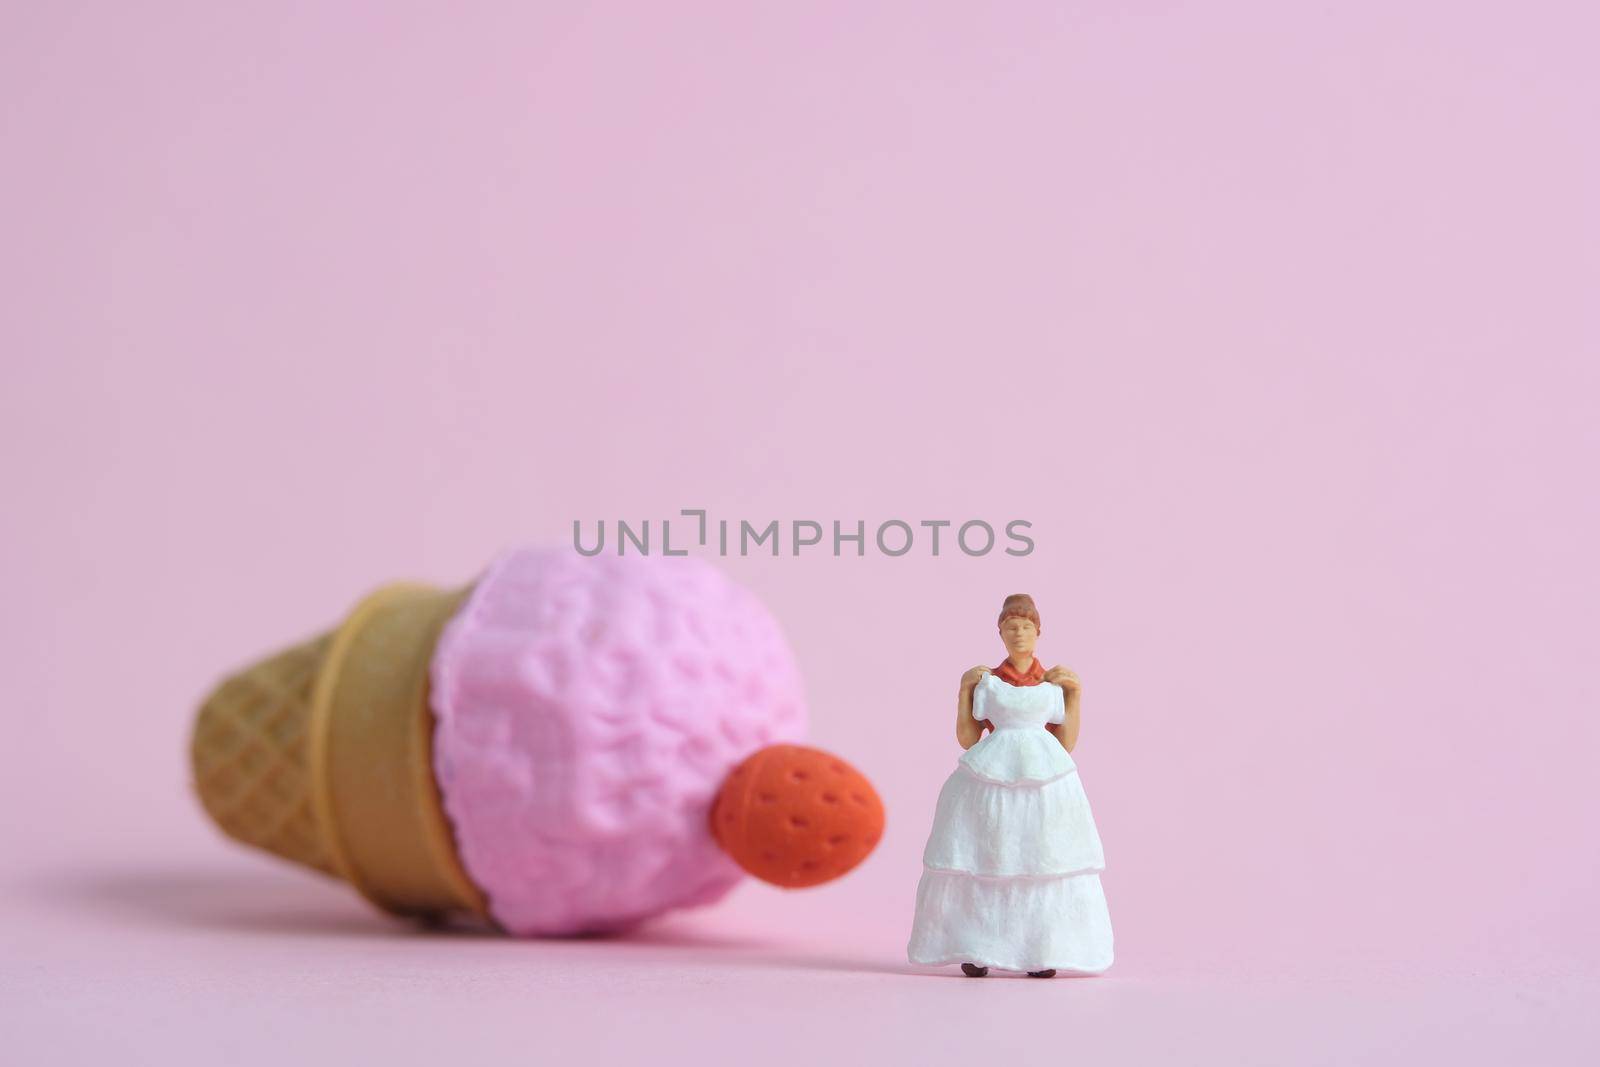 Woman dieting from ice cream and fat before wedding day concept. Miniature people toys photography, girl holding wedding dress. Image photo